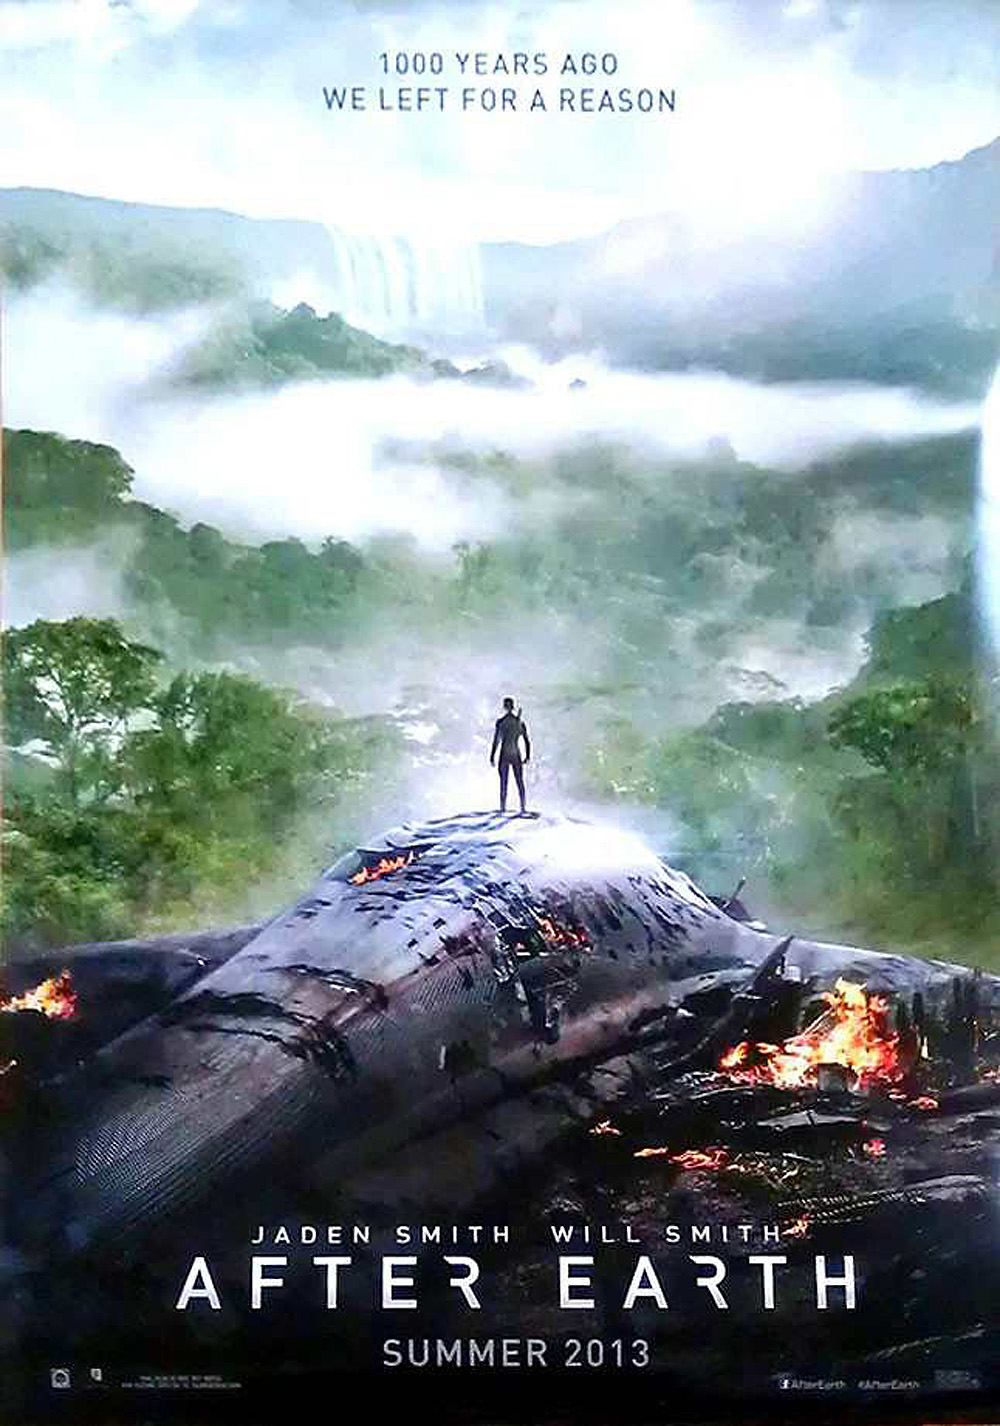 After Earth (2013) (In Hindi) Watch Full Movie Free Online - HindiMovies.to